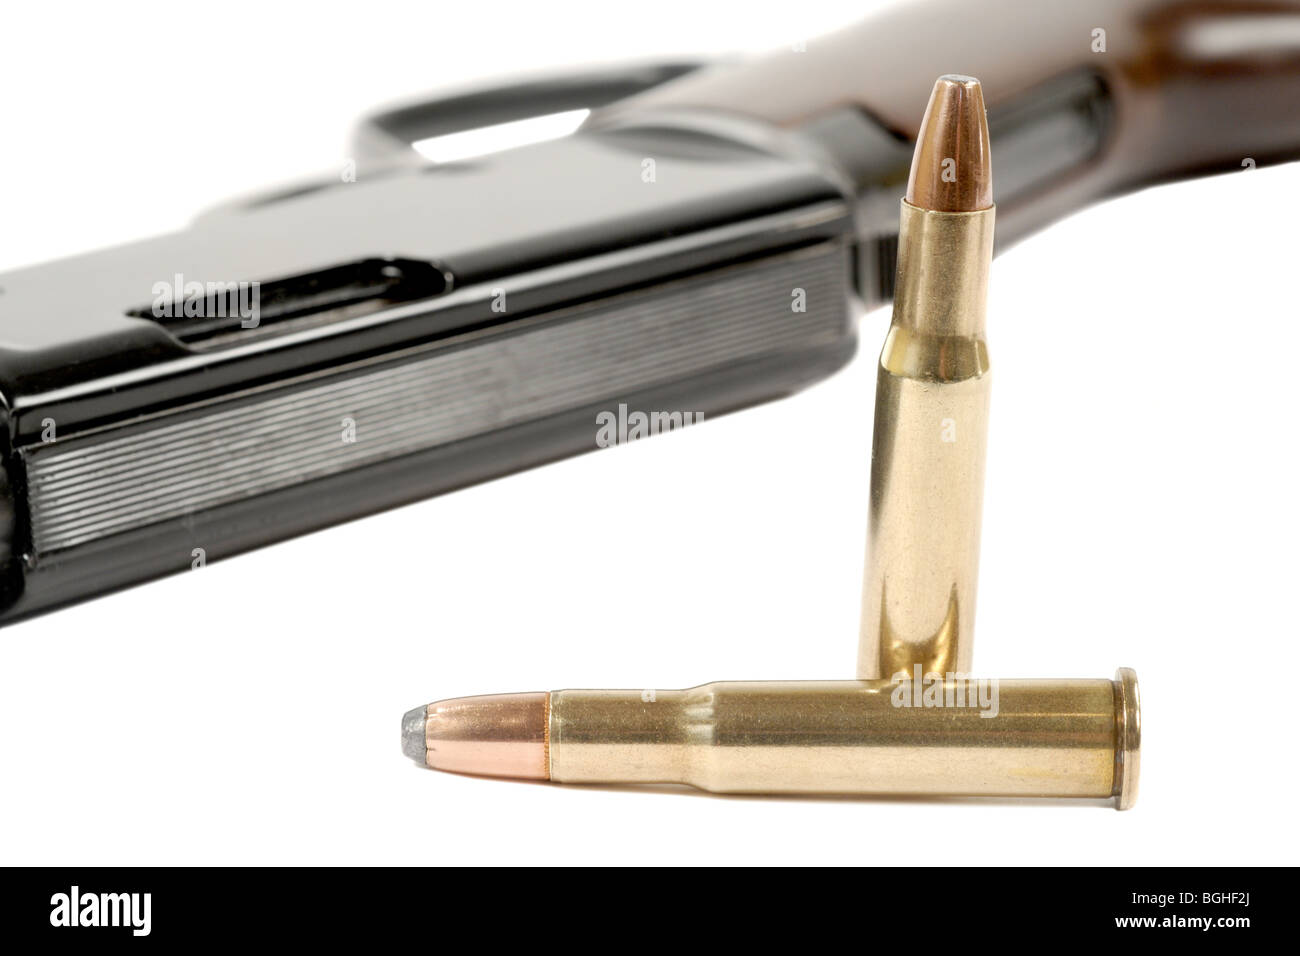 Macro shot of two bullets and a rifle Stock Photo